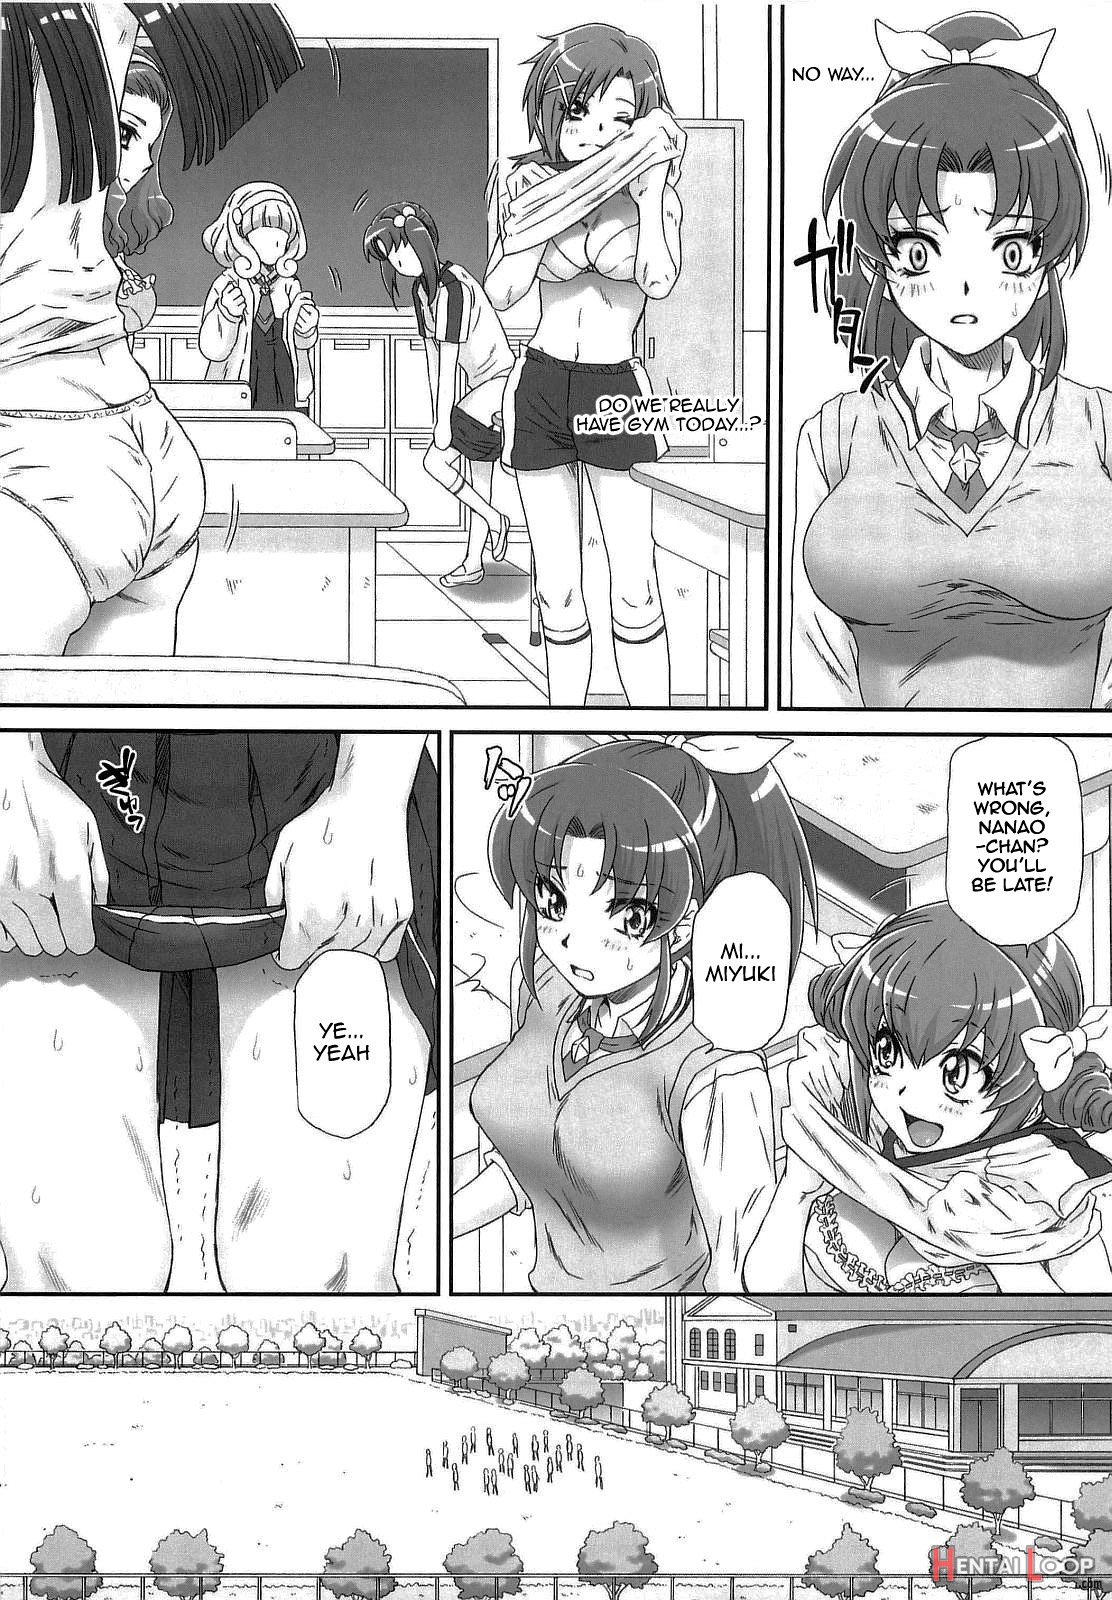 Let's Play With Nao-chan 2 page 6